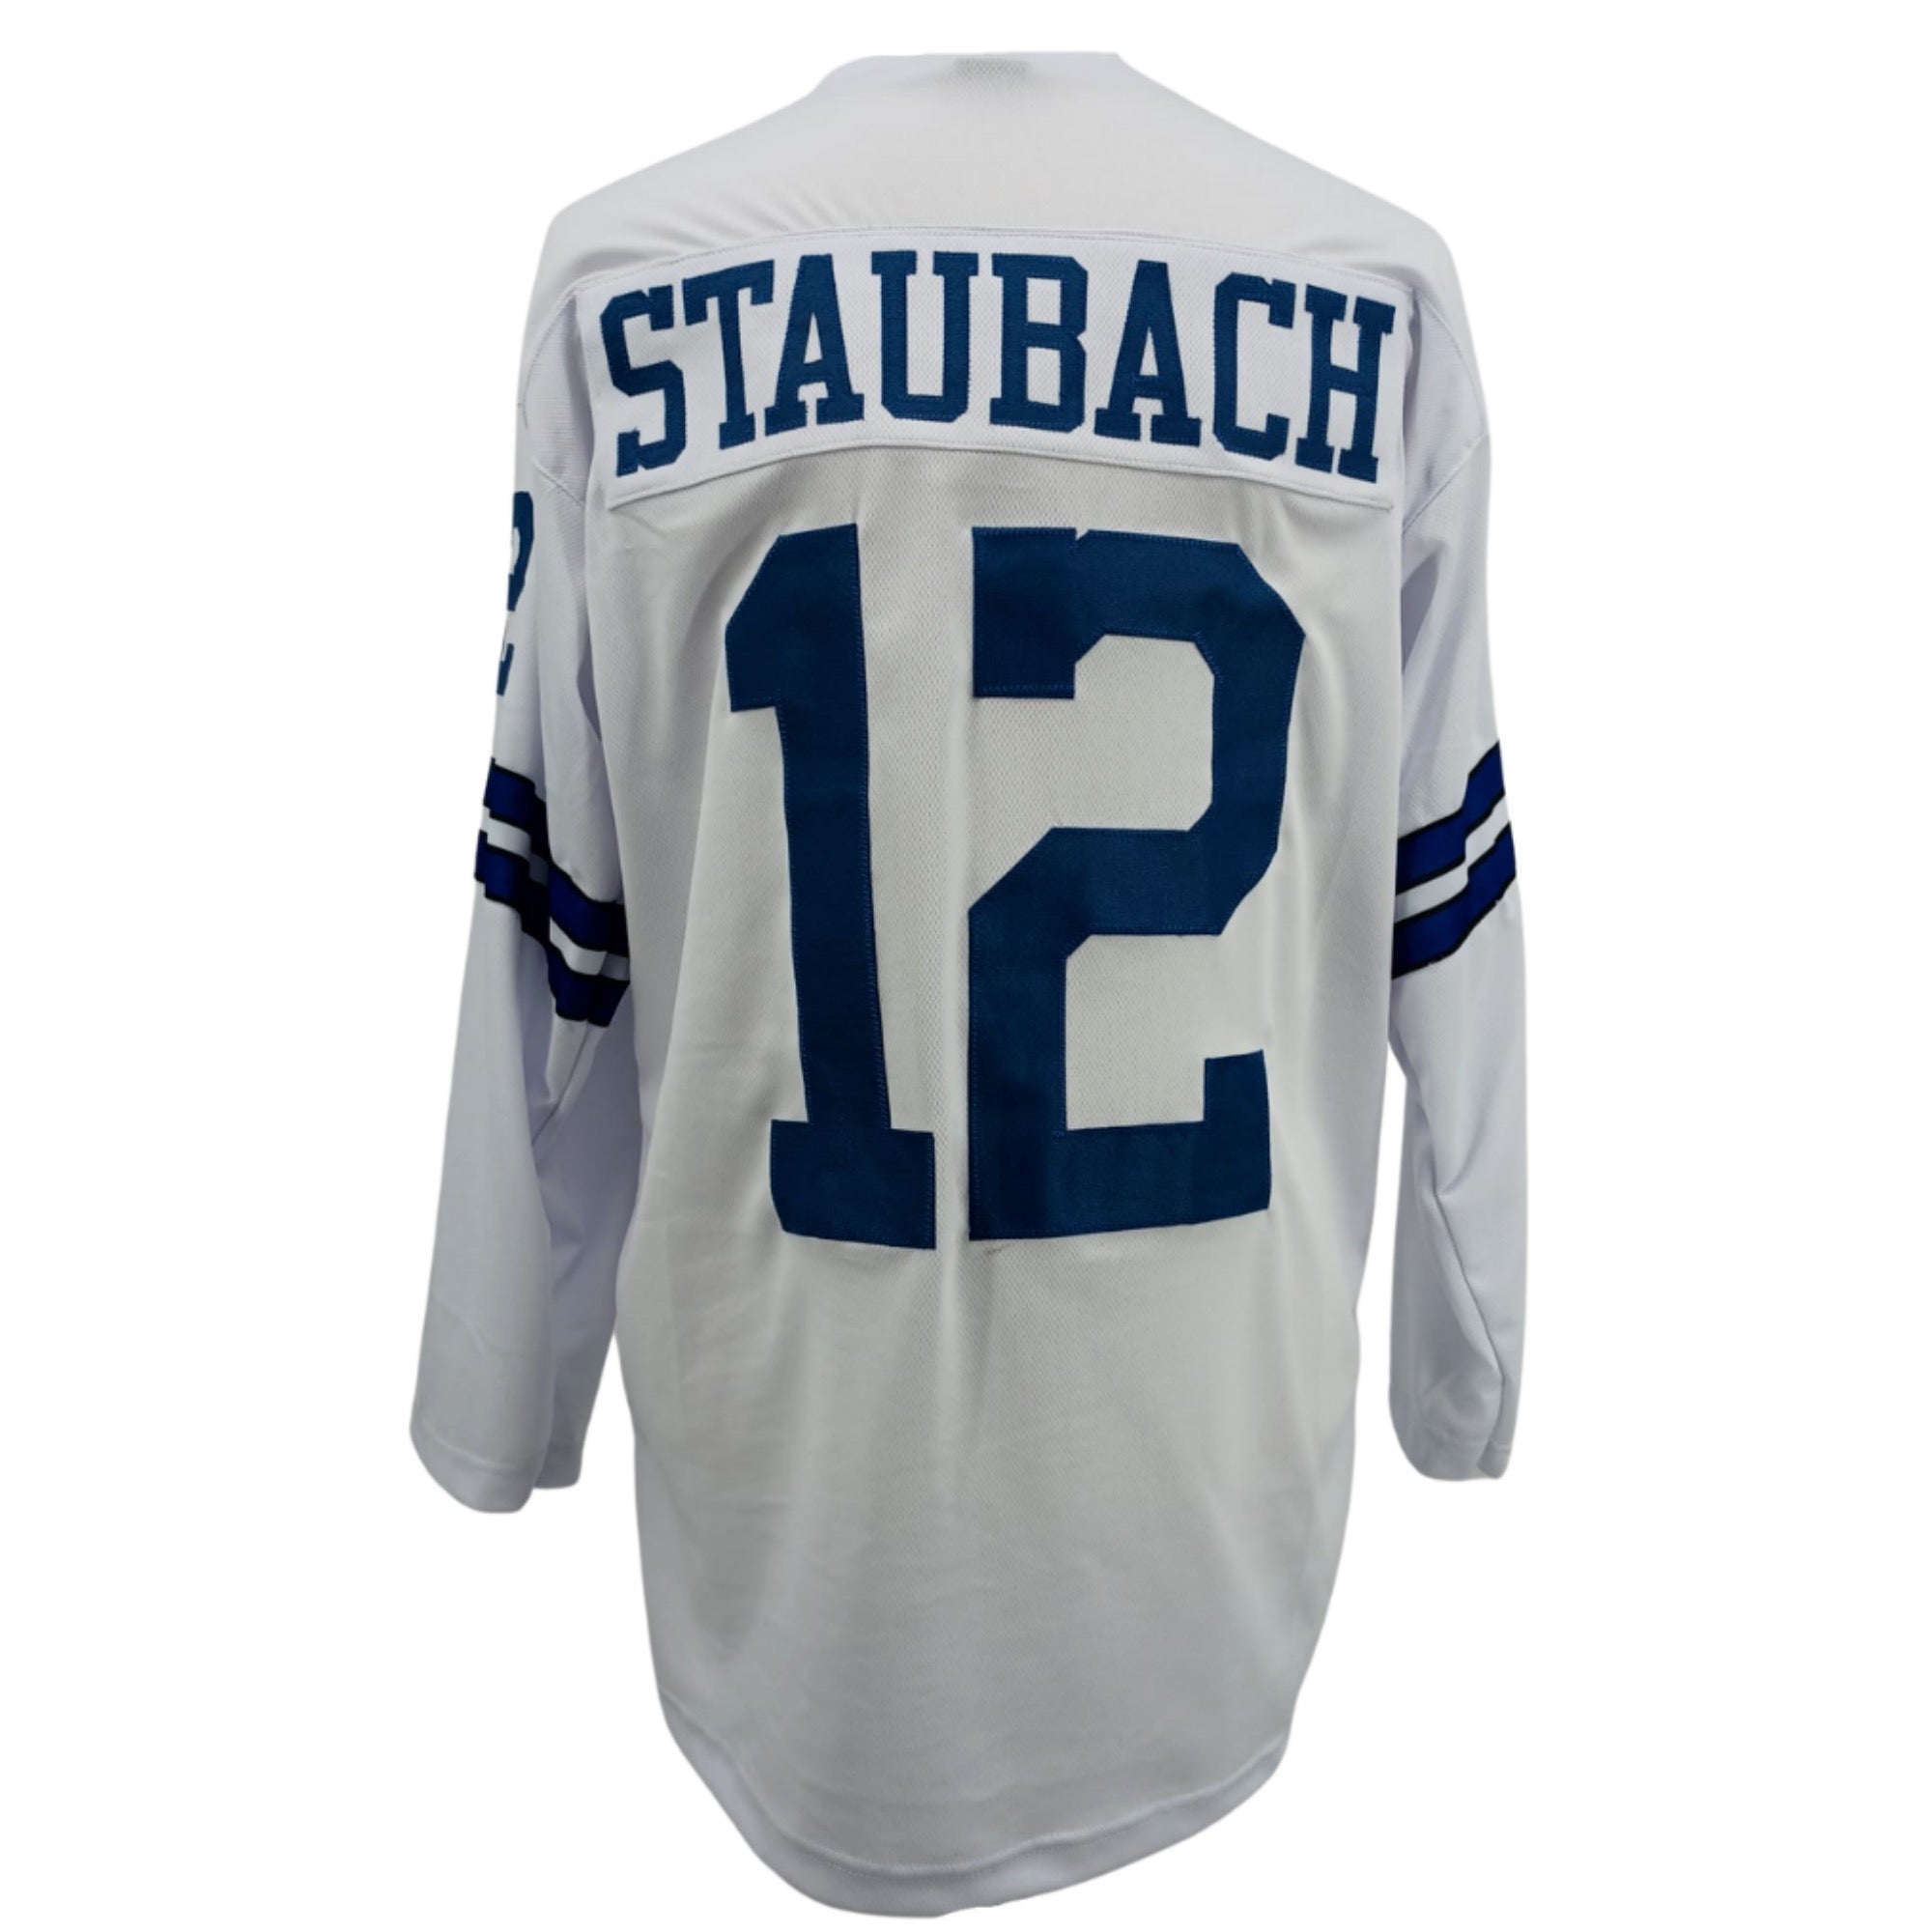 ROGER STAUBACH Dallas Cowboys L/S WHITE Jersey M-5XL Unsigned Custom Sewn Stitched